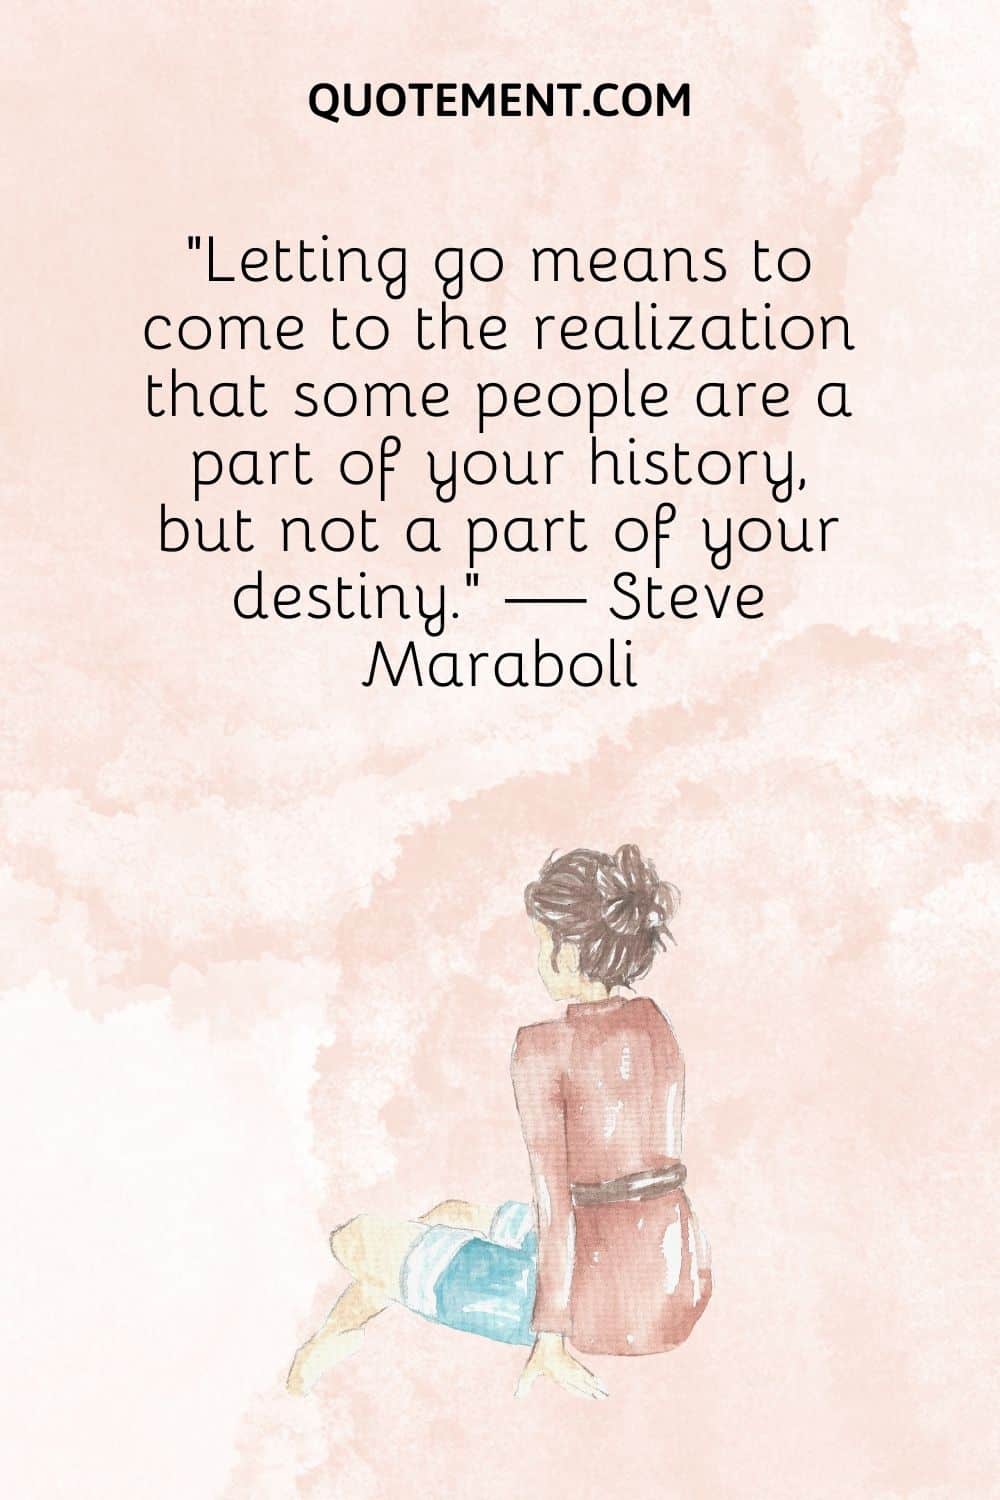 Letting go means to come to the realization that some people are a part of your history, but not a part of your destiny